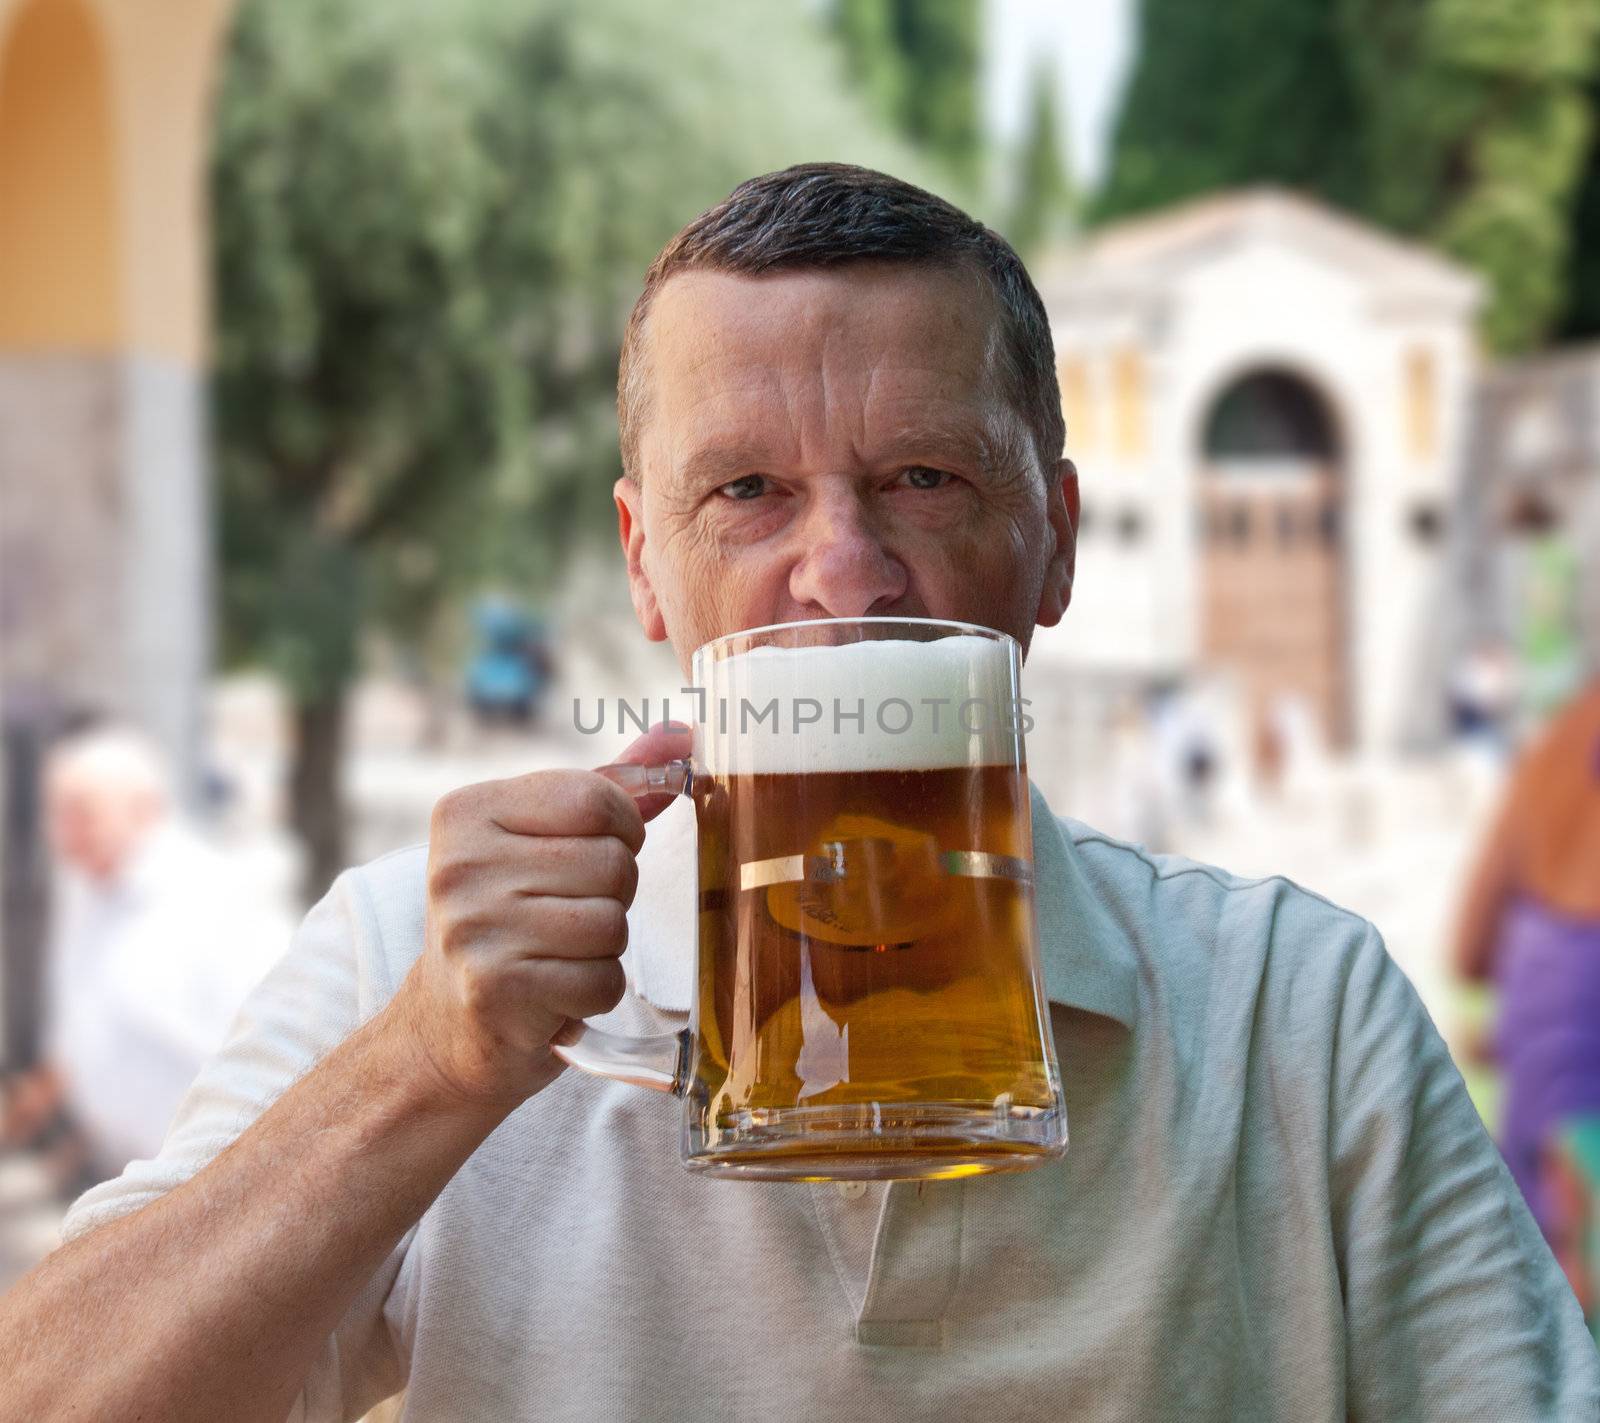 Large liter glass of beer in senior hand by steheap